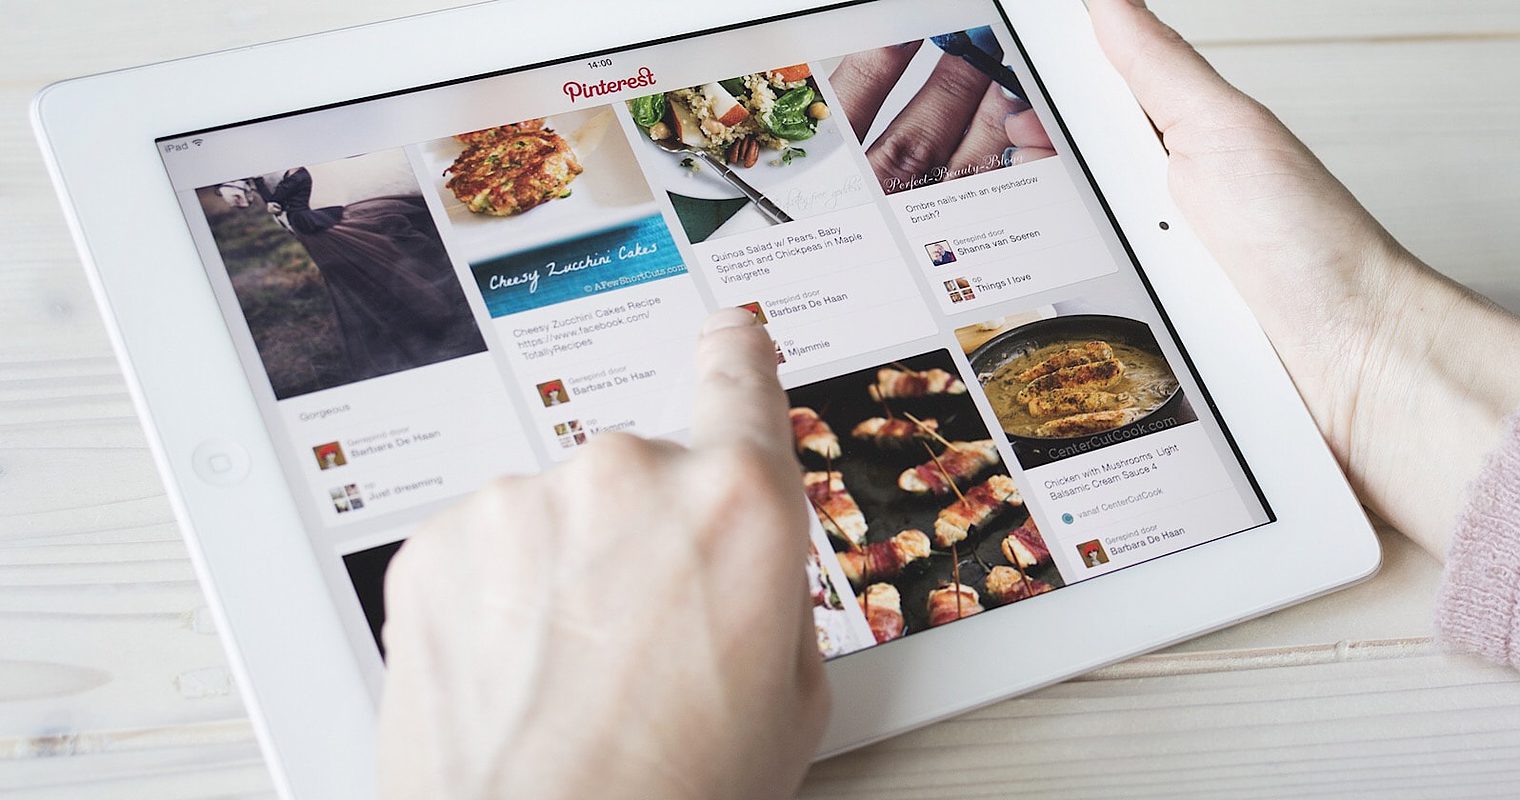 Pinterest Search Ads Now Available to All Businesses